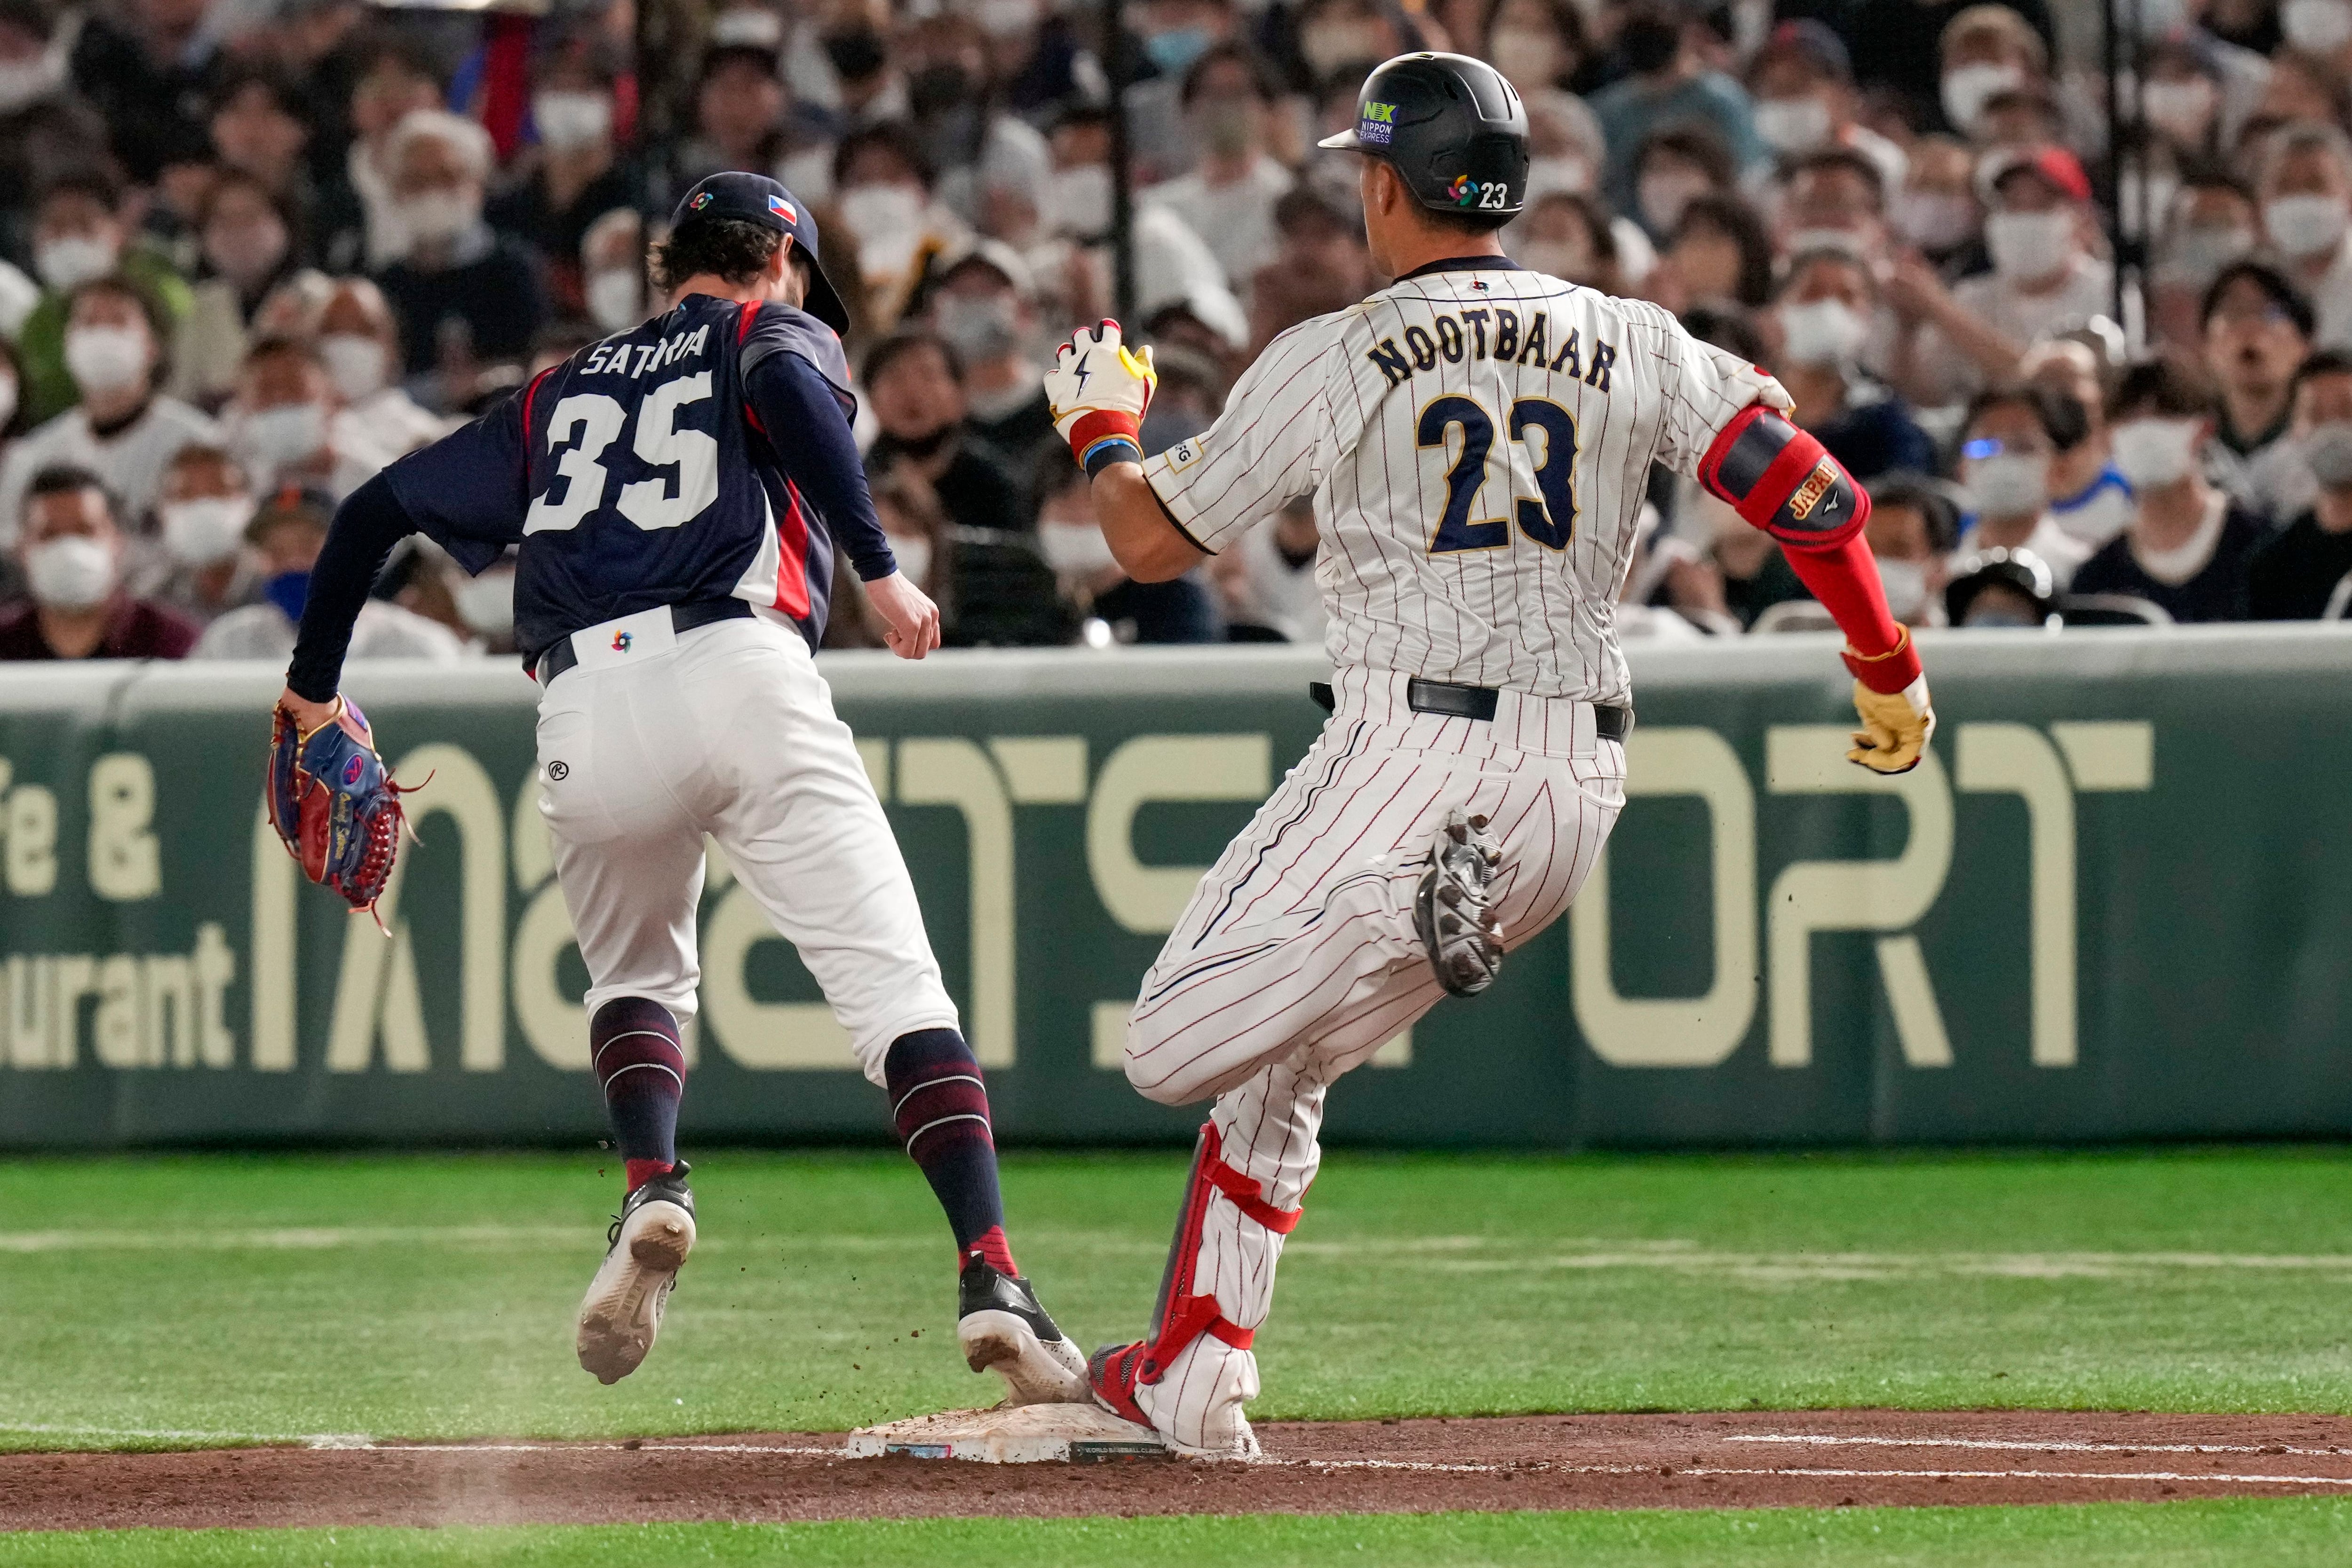 Lars Nootbaar is committed to play for Samurai Japan in the WBC 🇯🇵 : r/ baseball